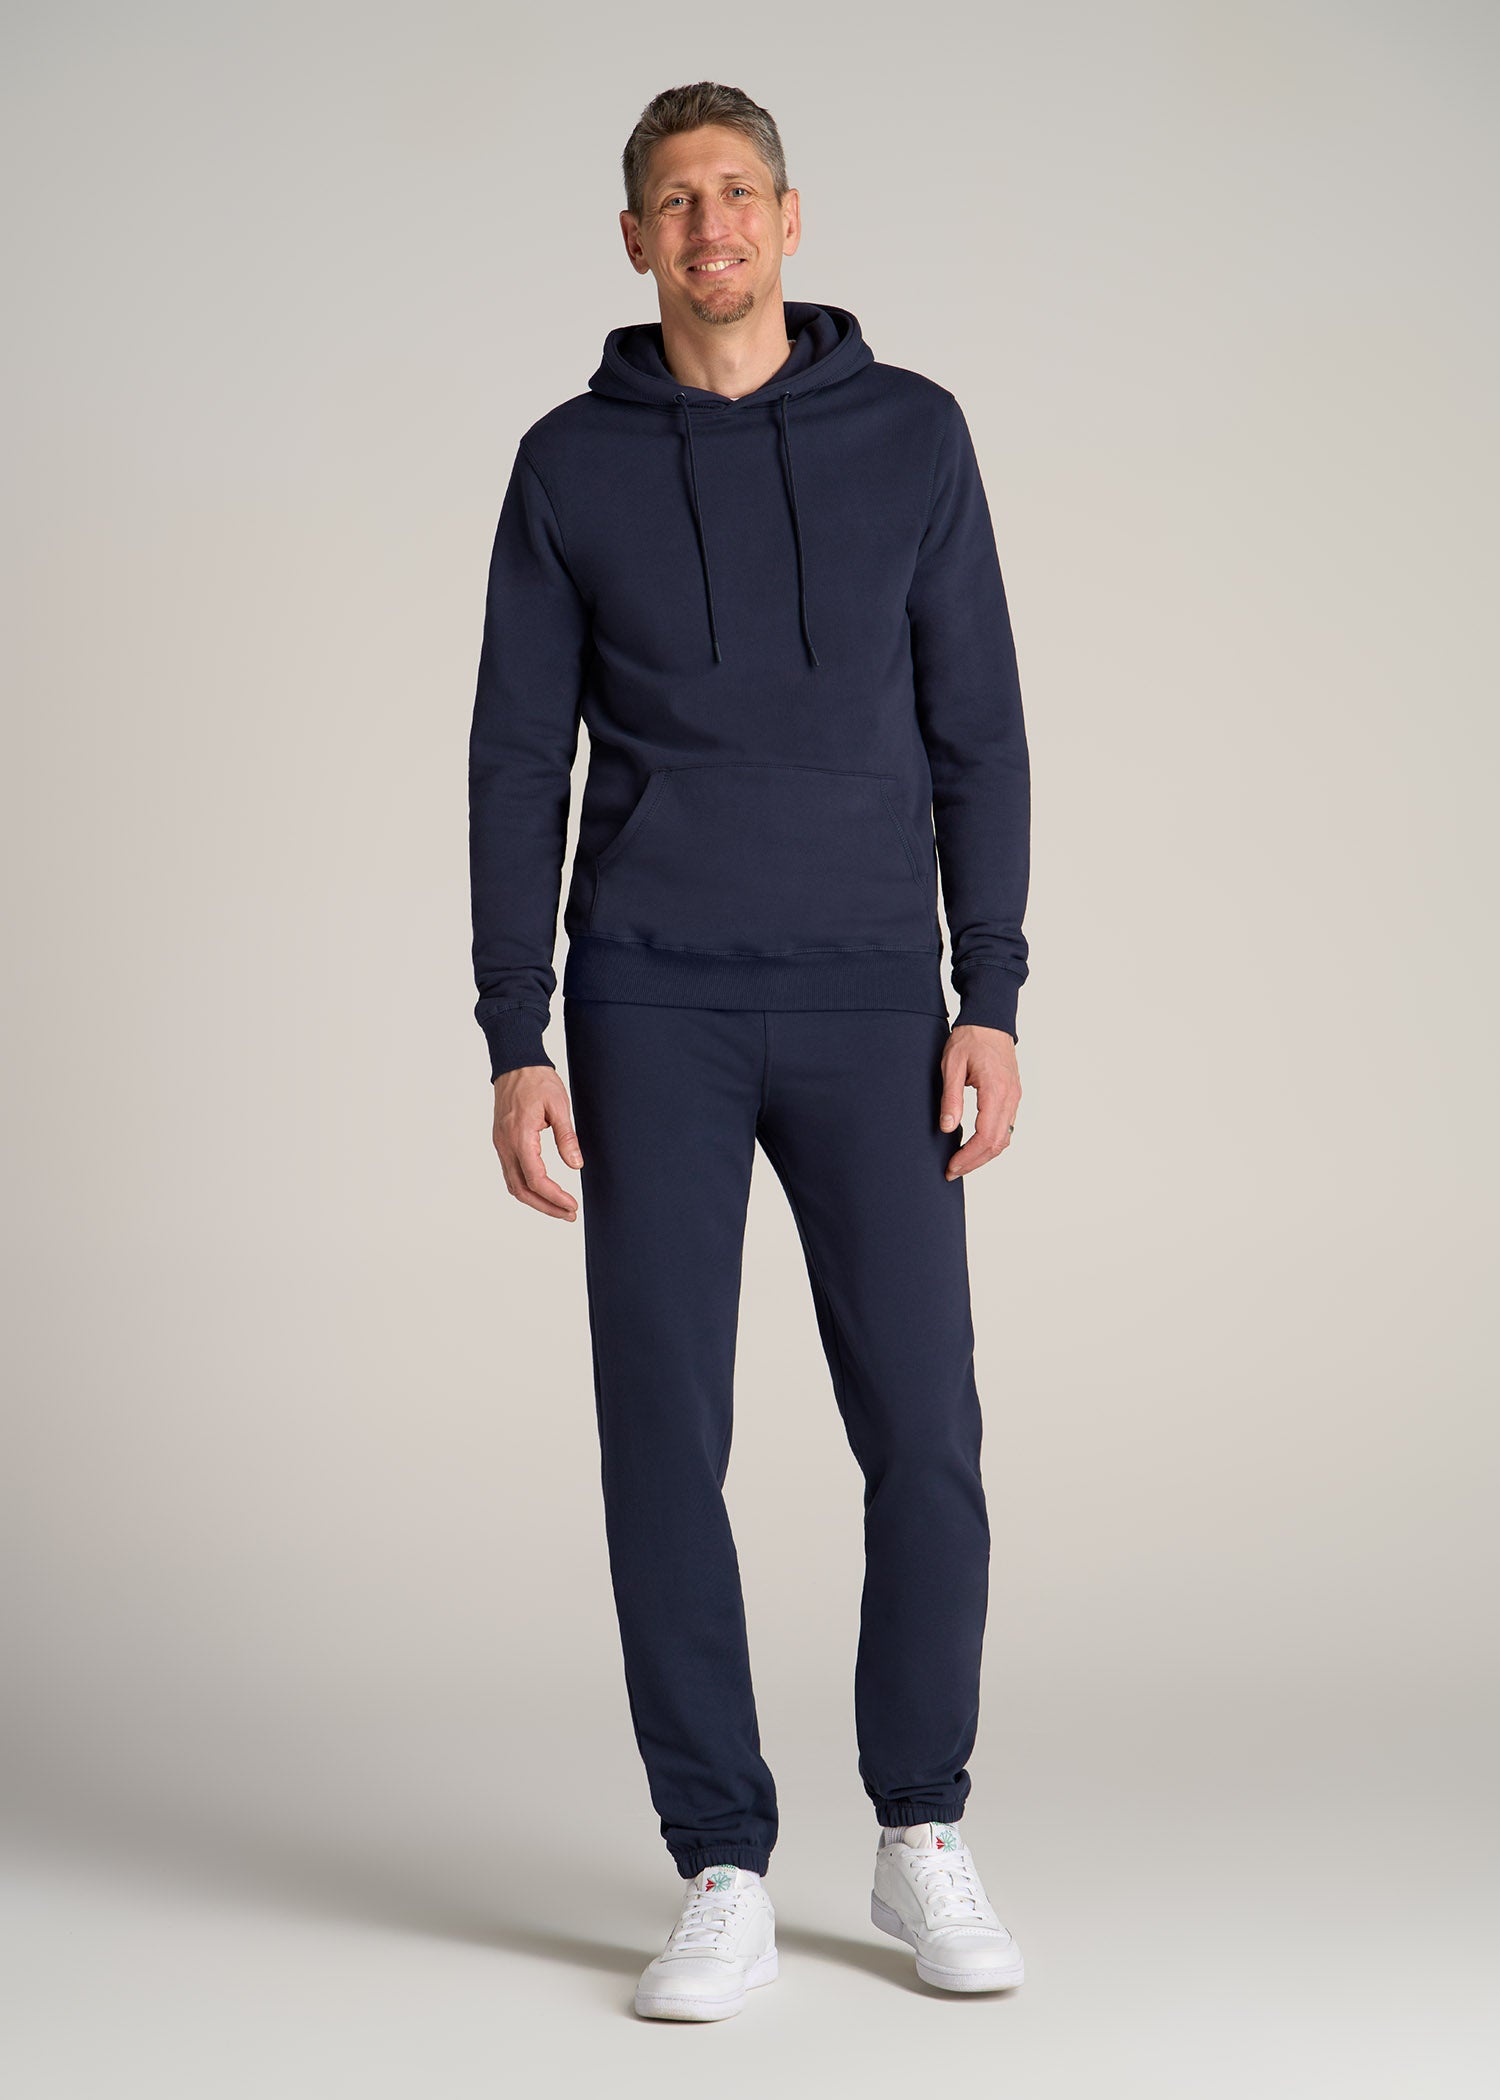 Men's Tall French Terry Sweatpants Navy